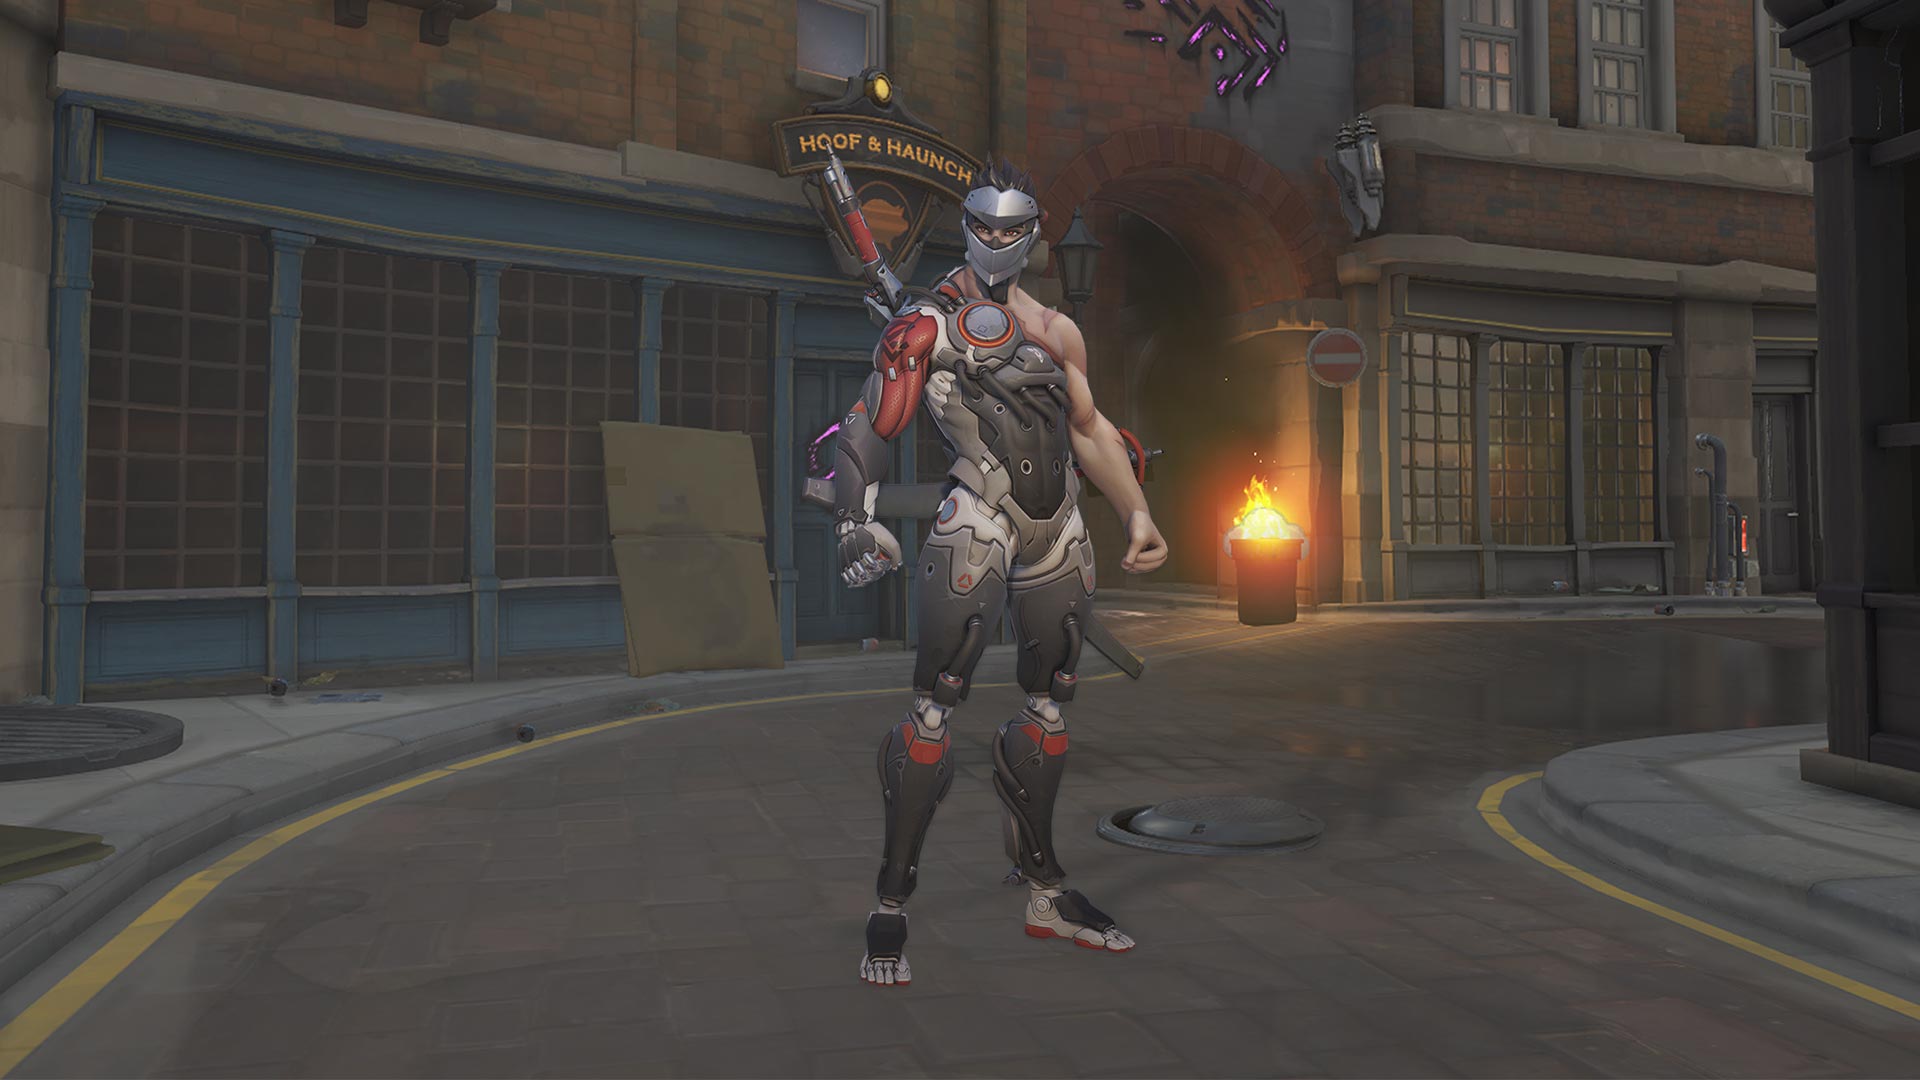 Overwatch’s ‘Uprising’ Event Adds New Co-Op Brawl, 100 New Items